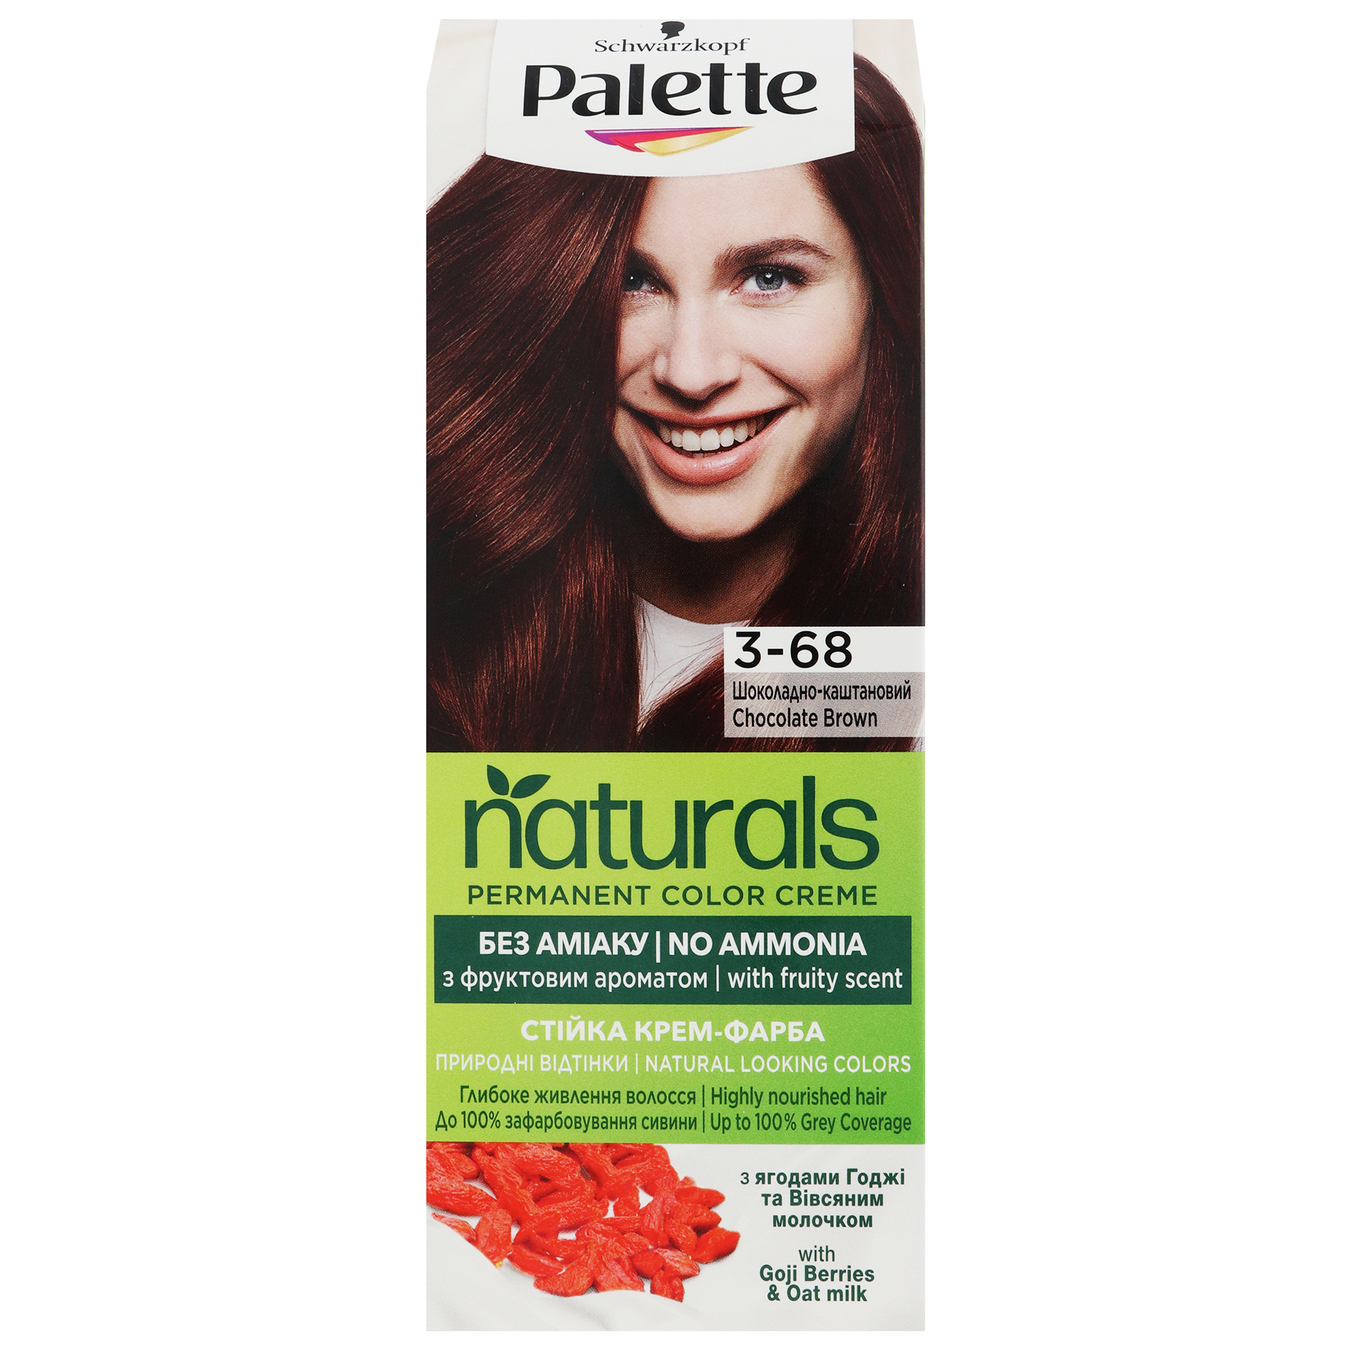 Cream paint Palette Naturals 3-68 Chocolate-chestnut without ammonia permanent hair color 110ml